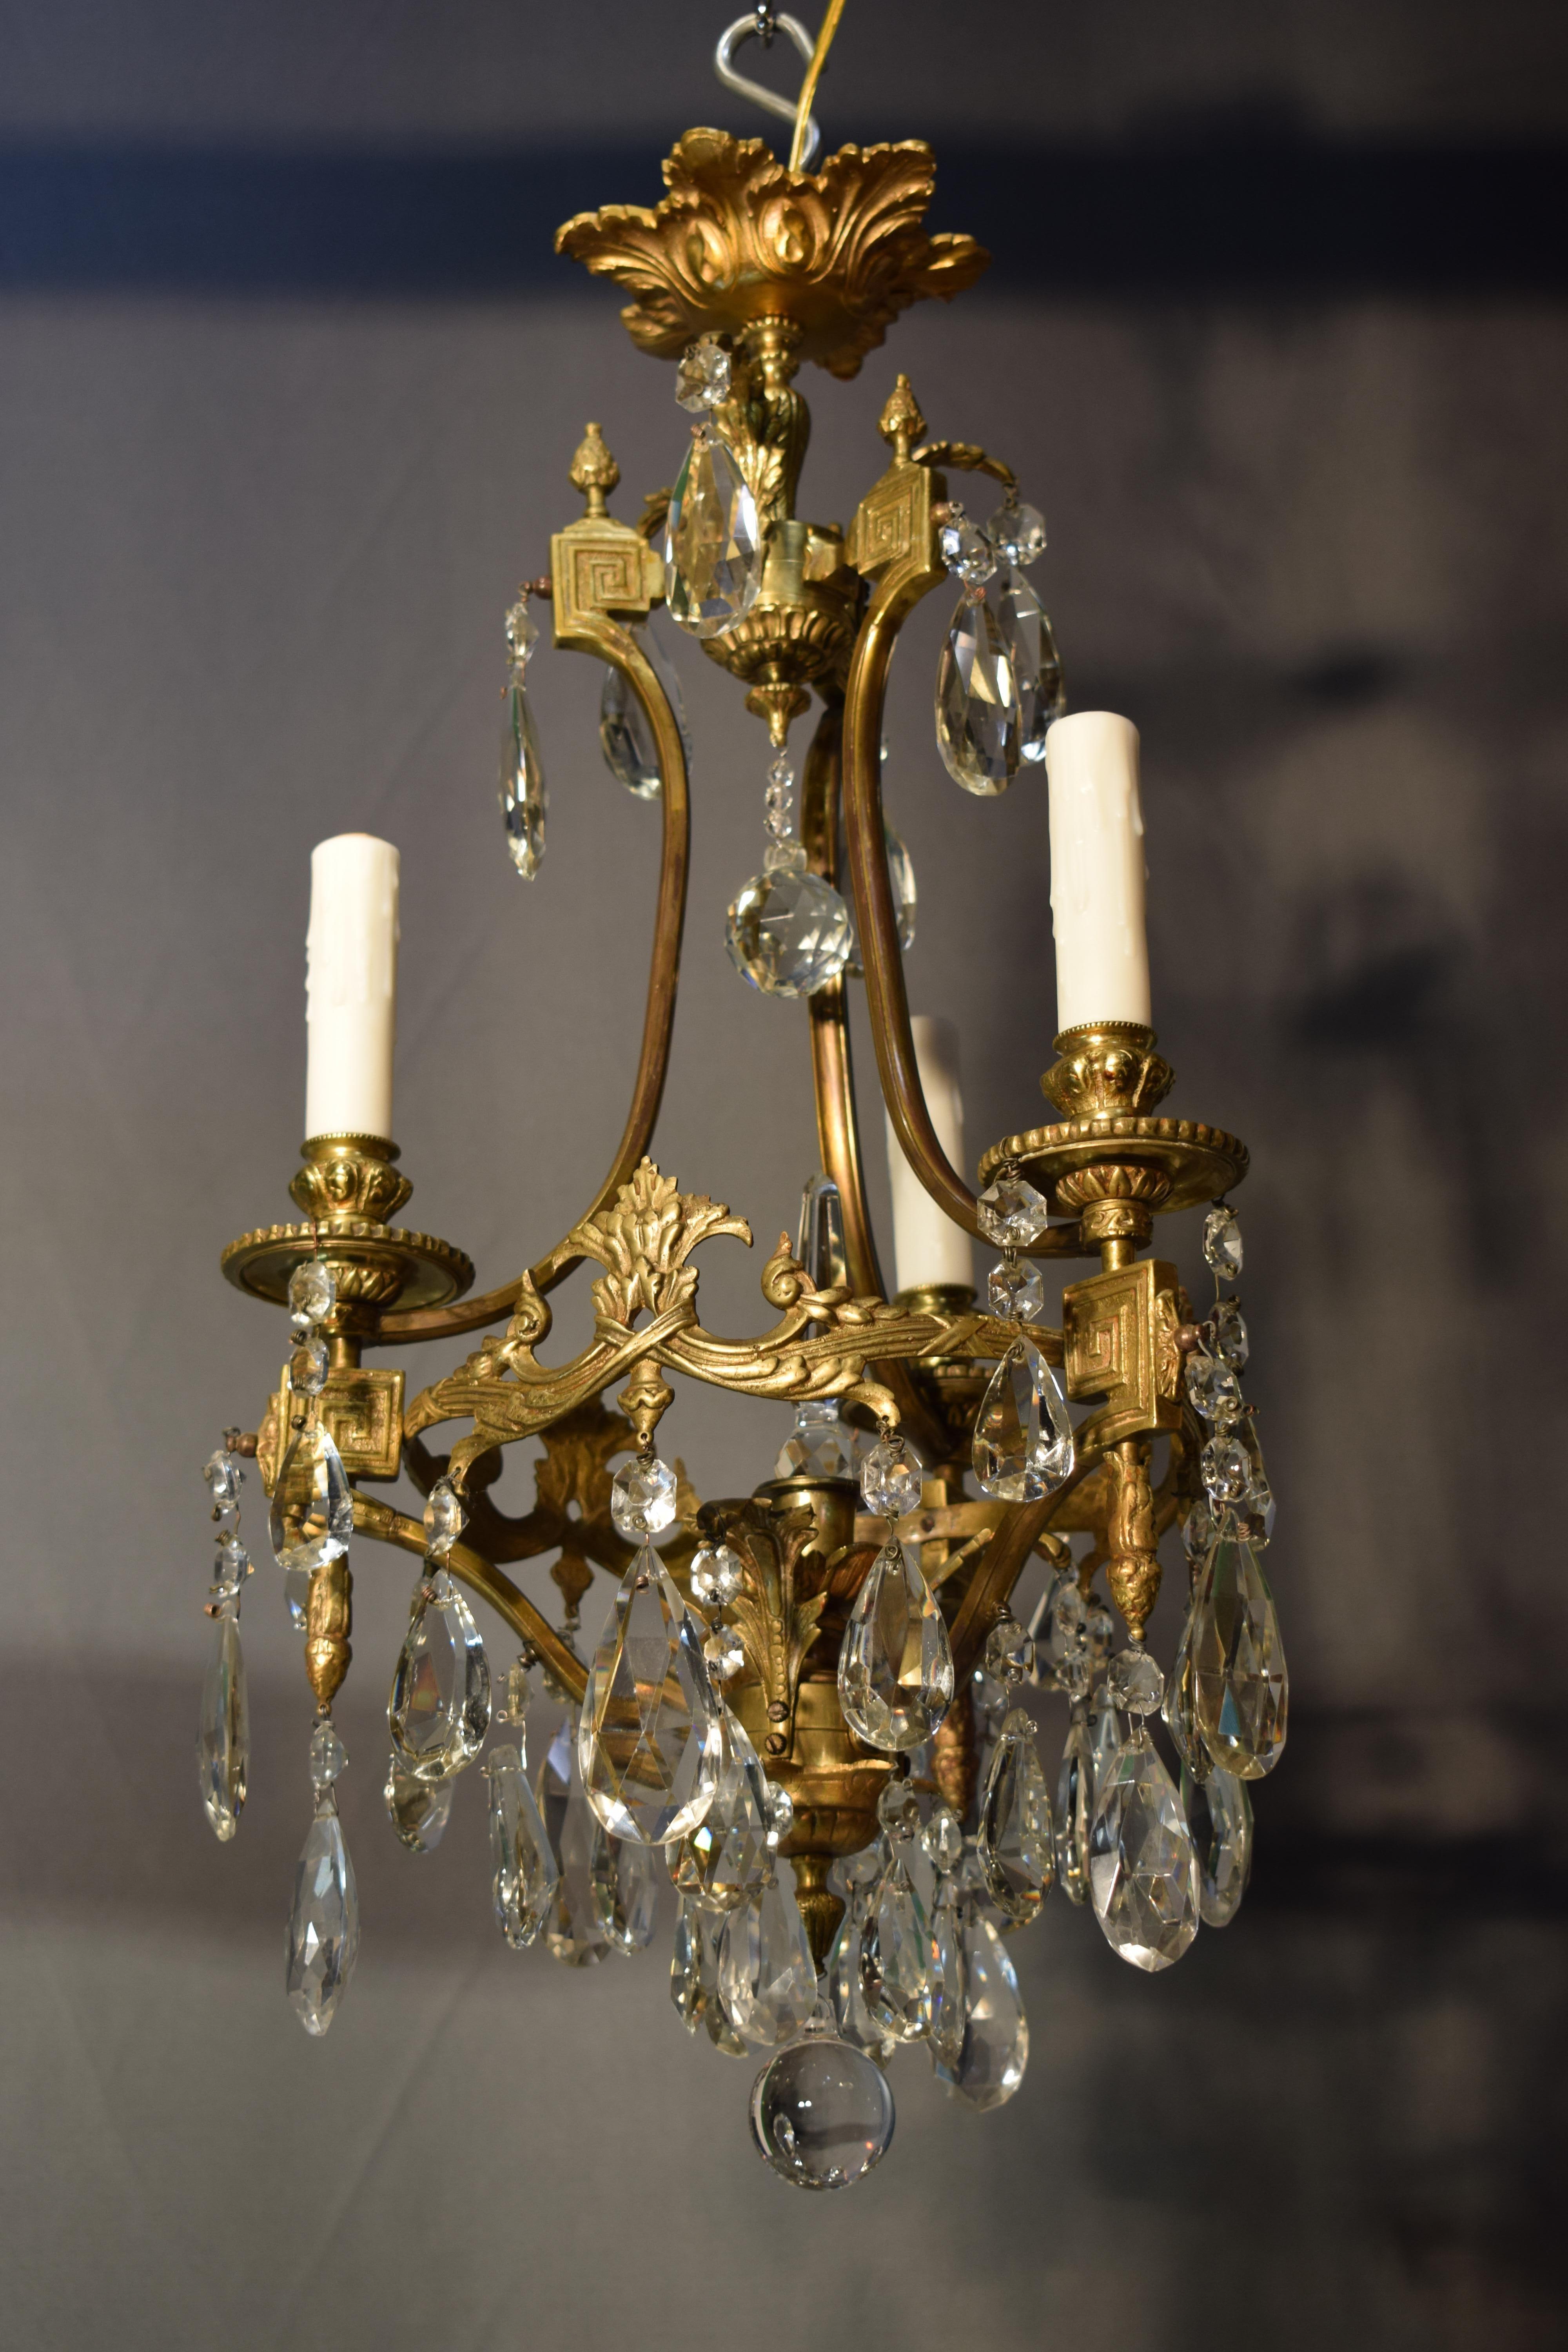 Early 20th Century A fine gilt bronze and crystal chandelier by Baccarat.